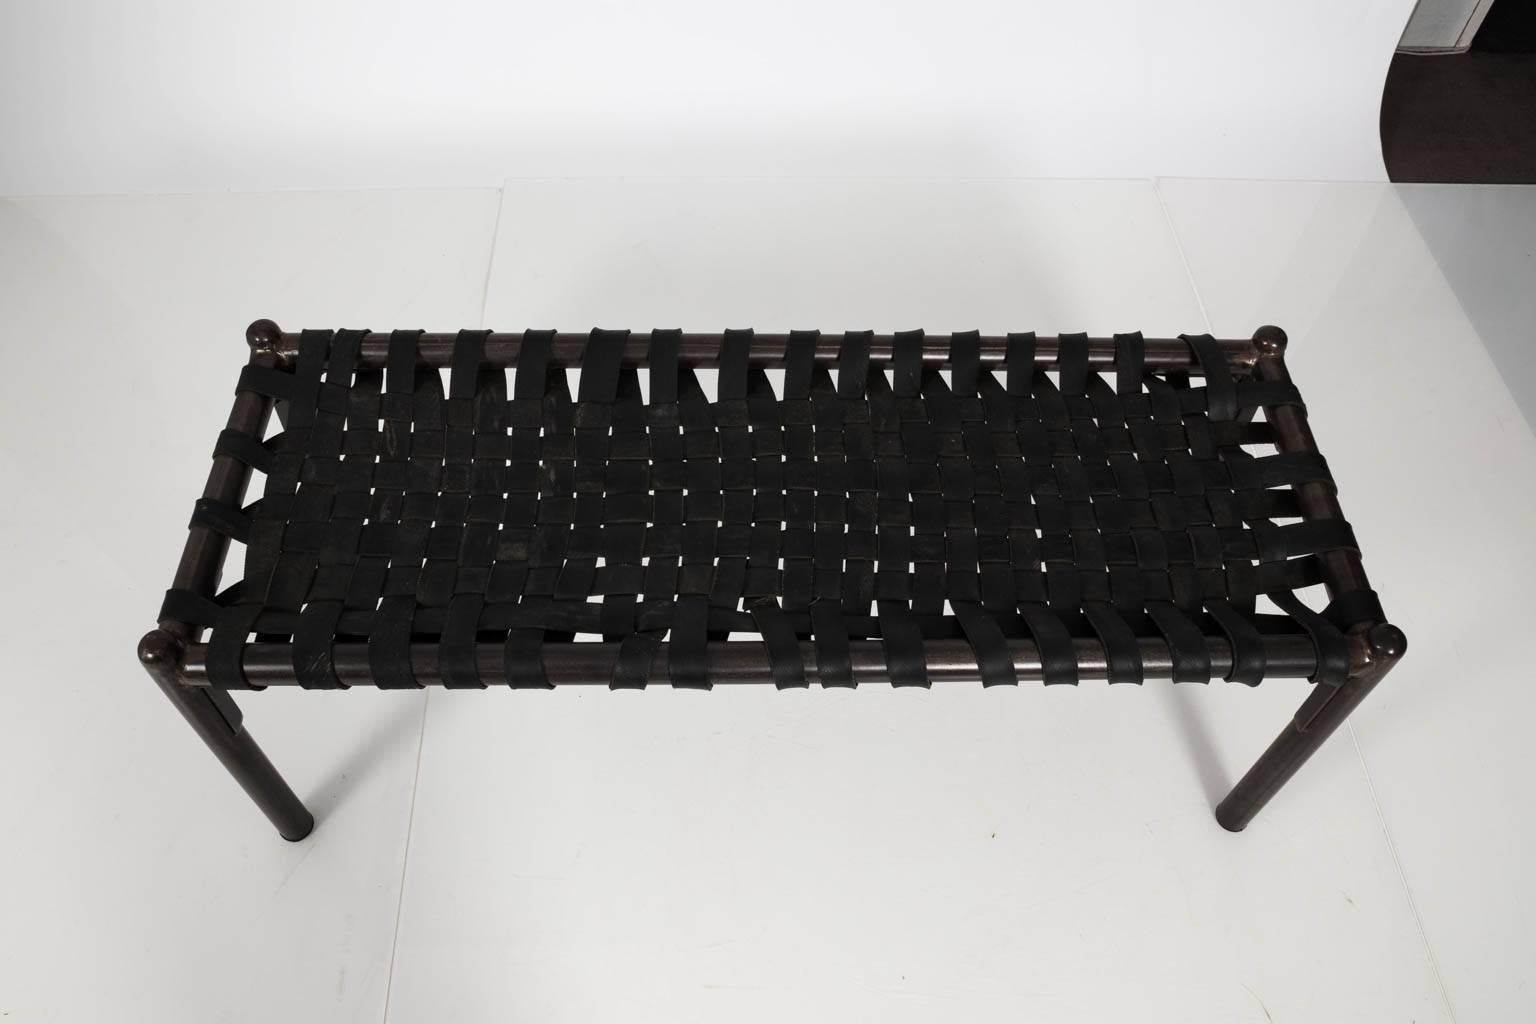 Mid-Century Modern style woven rubber strap bench with a black metal frame on teak wood legs.
 